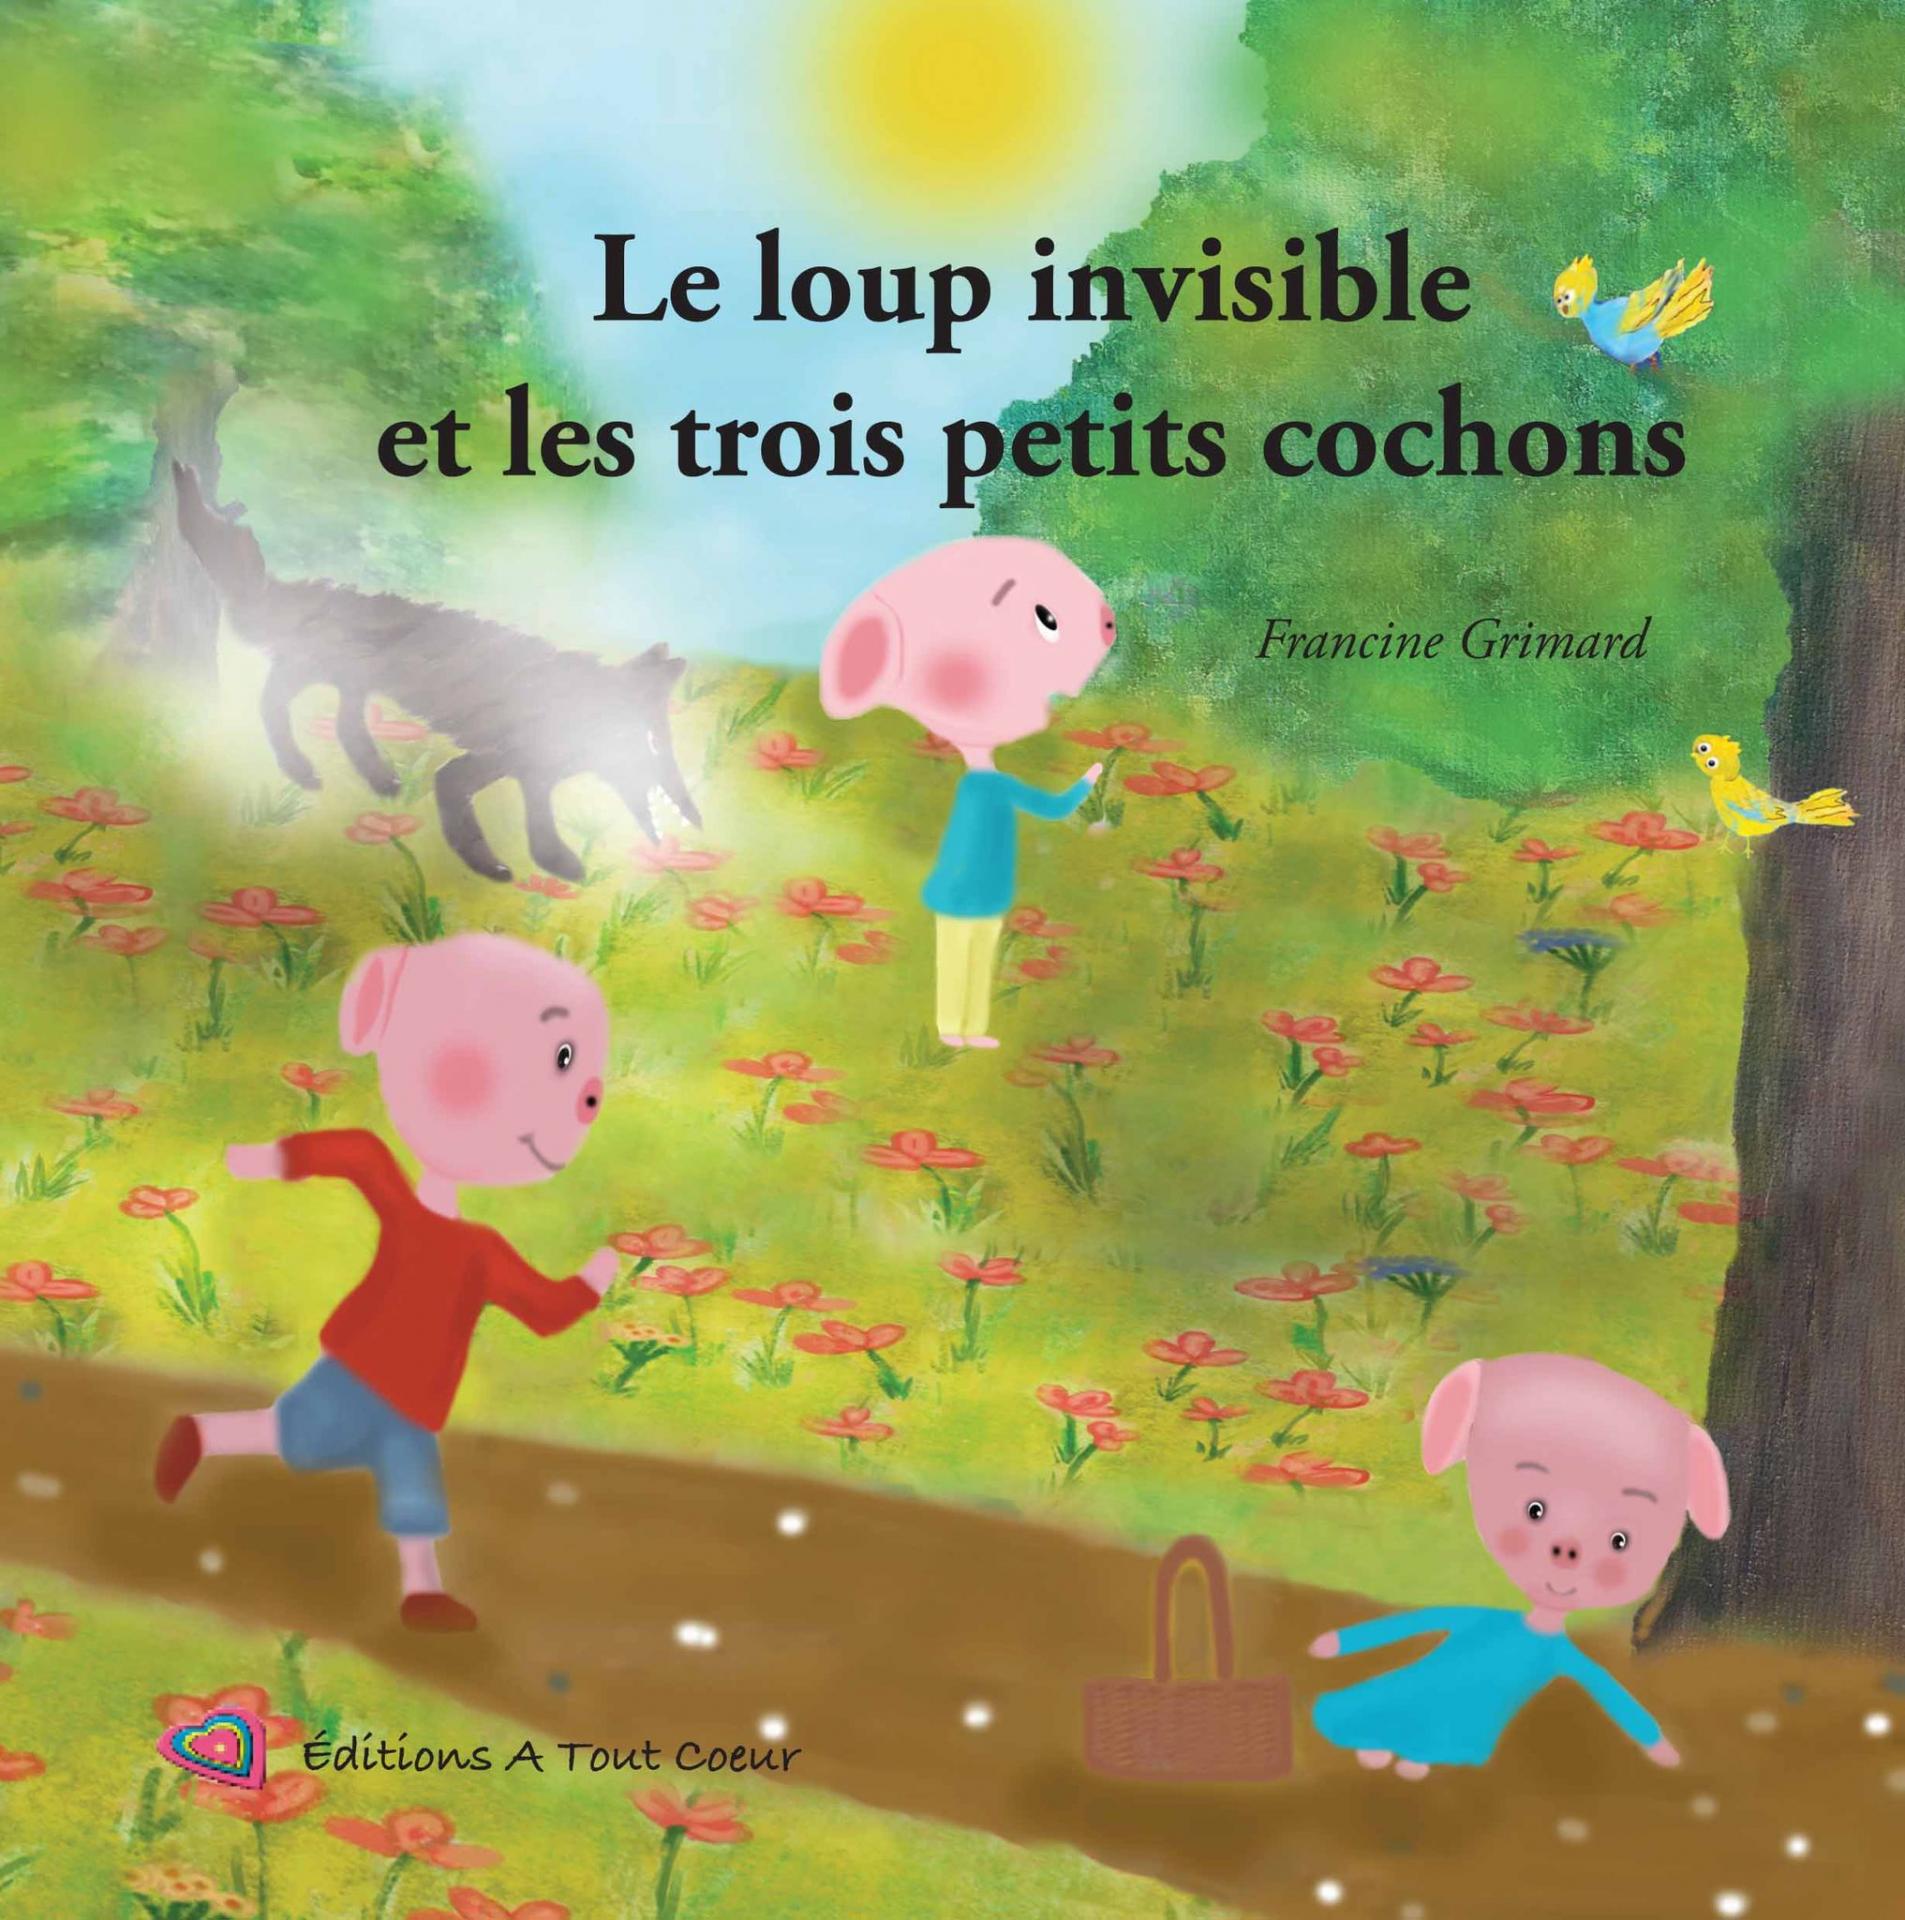 Loup invisible 3 cochons 1ere